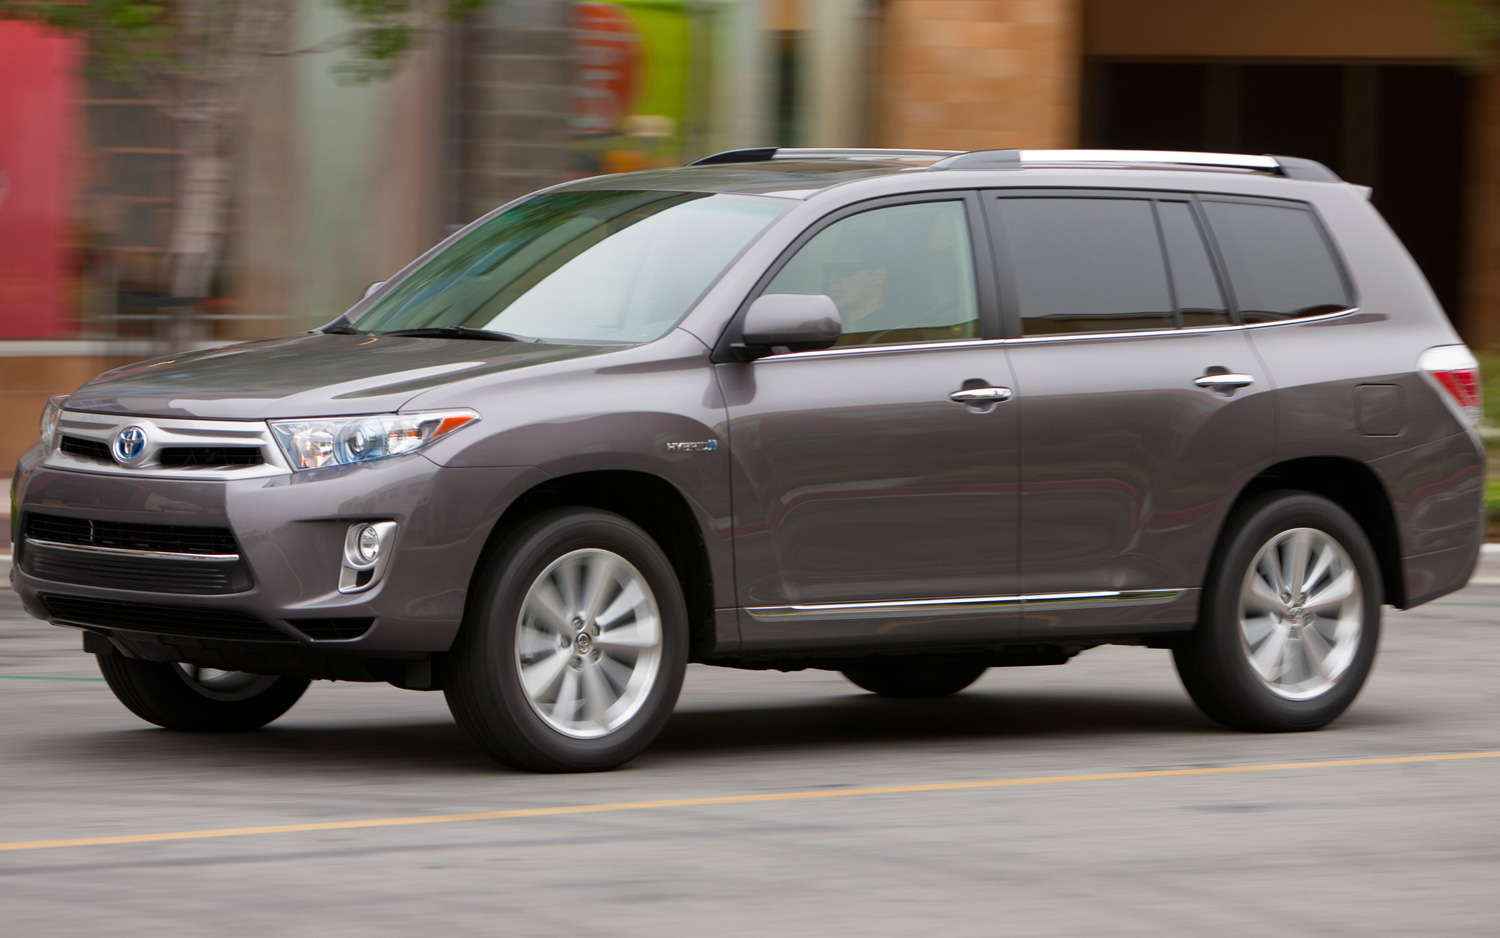 Toyota Highlander 2000: Review, Amazing Pictures and 